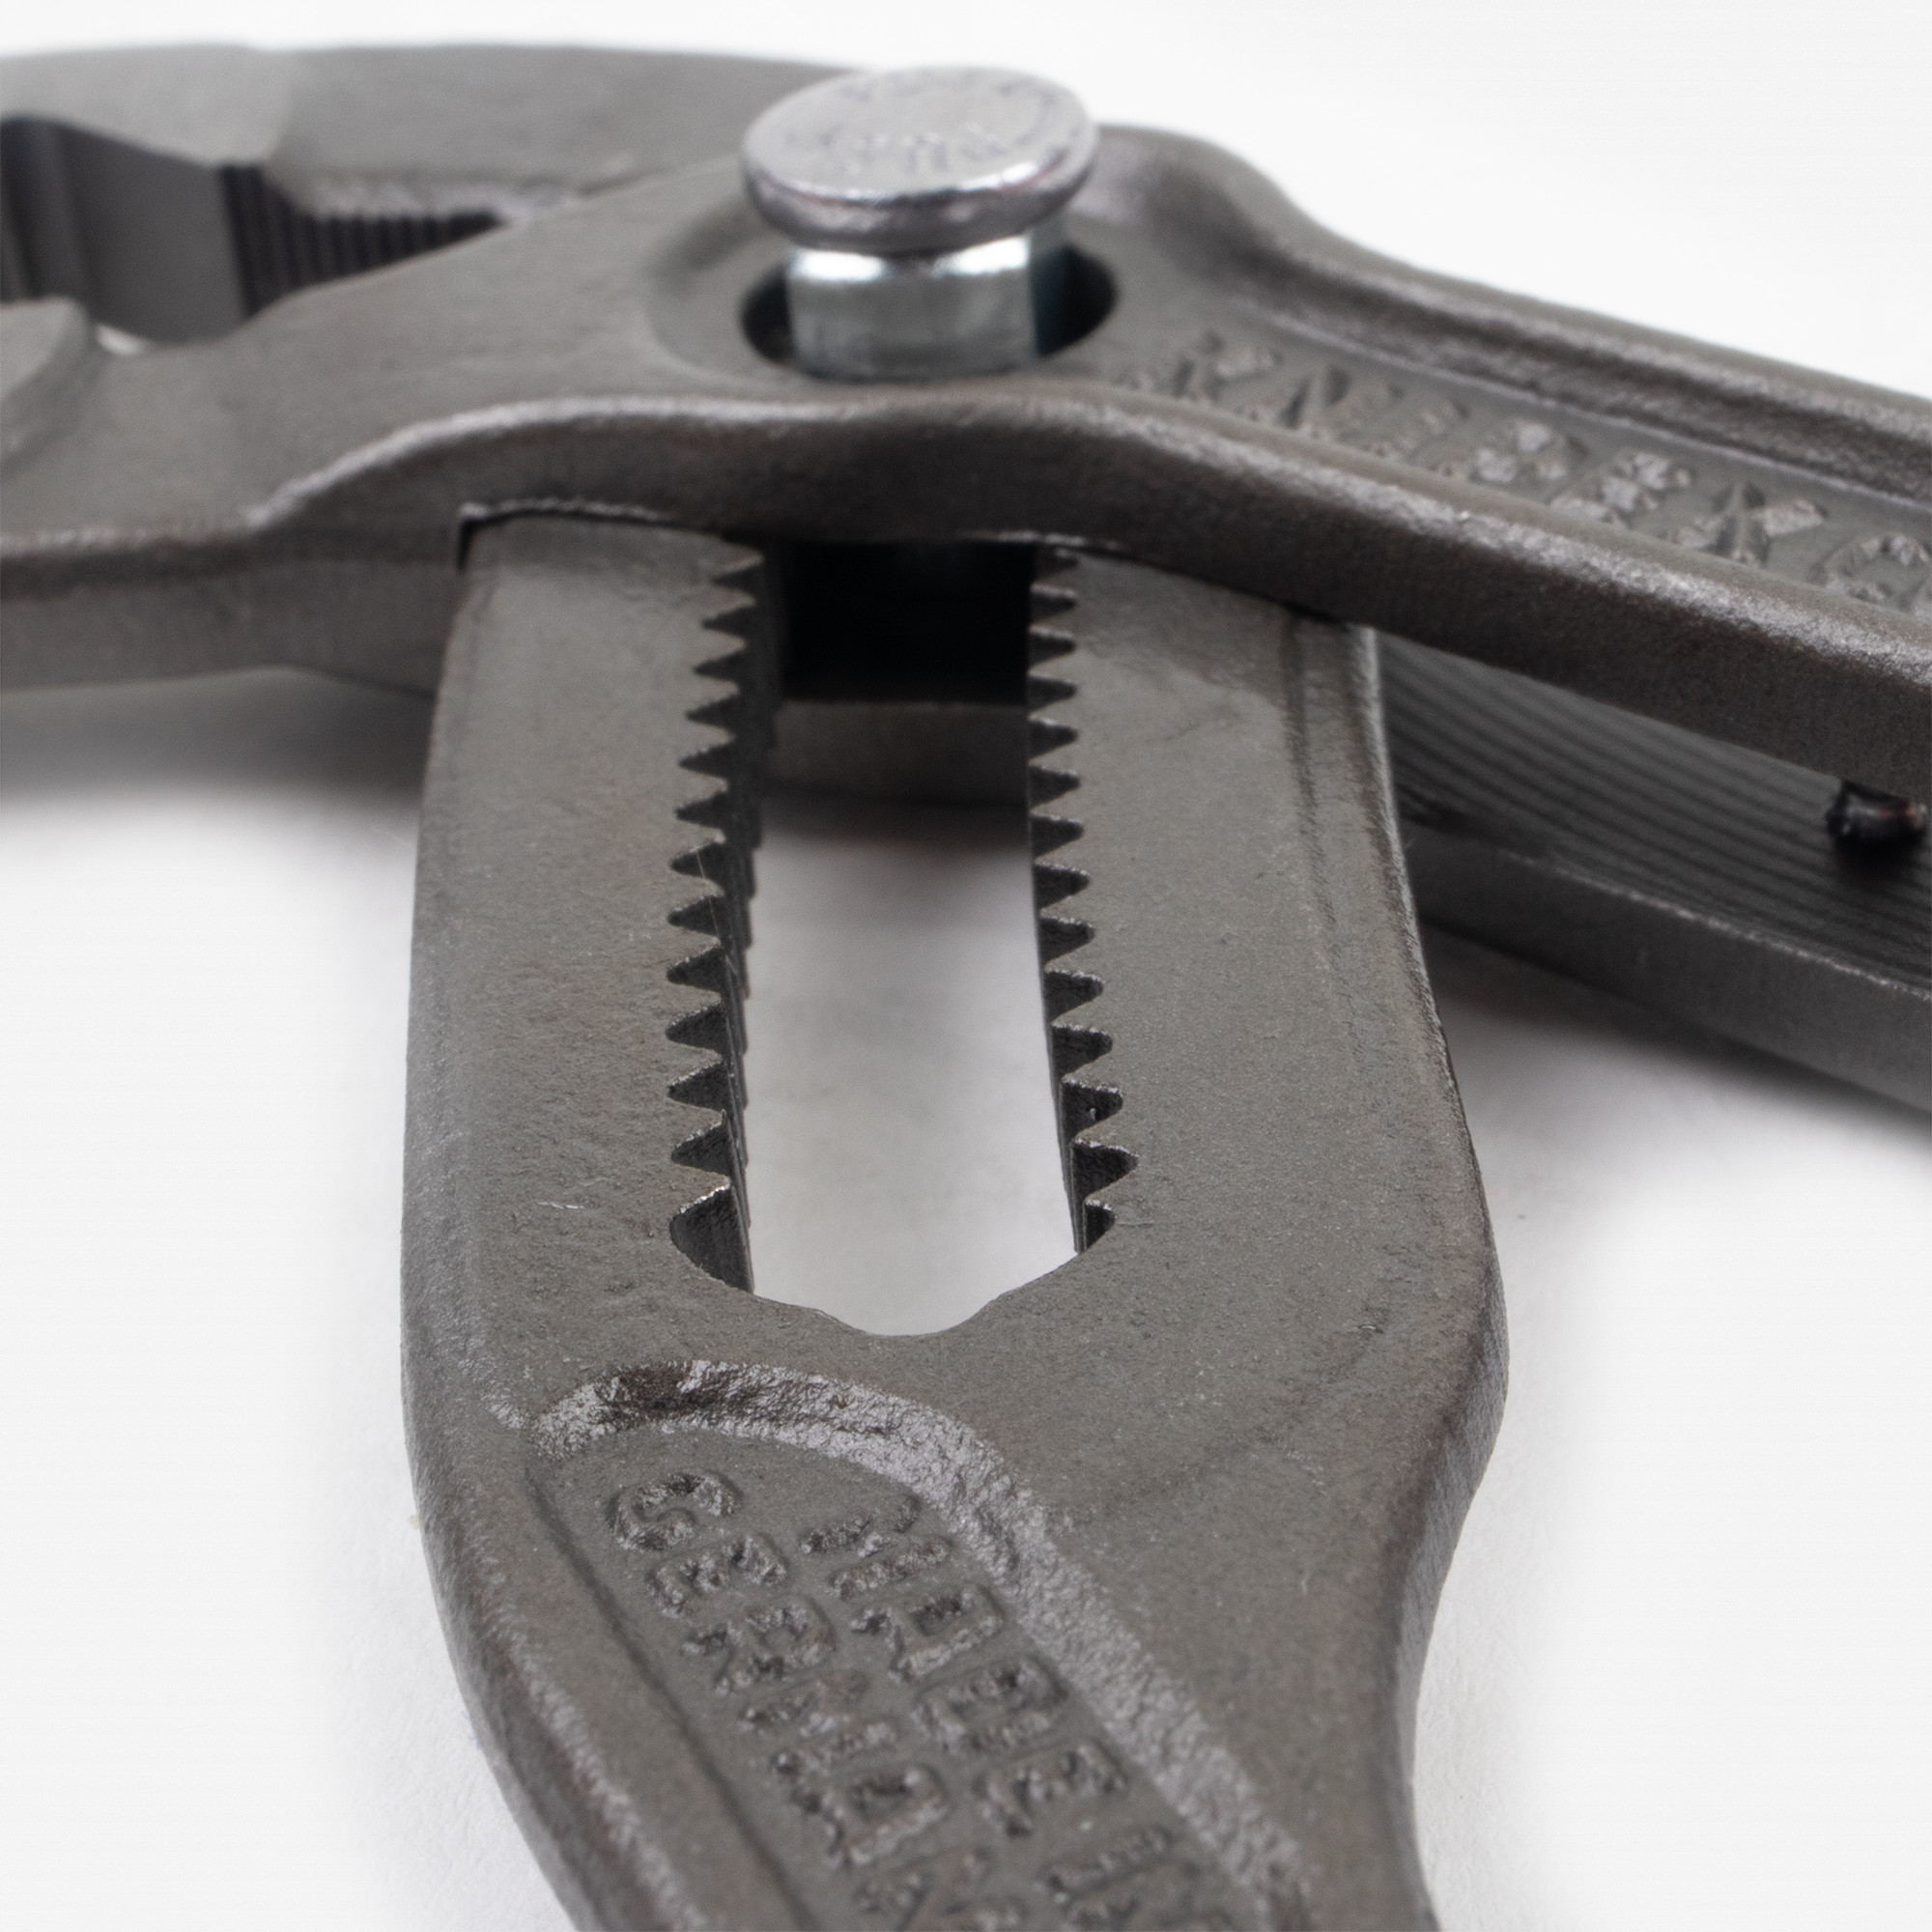 Goodbye adjustable wrenches: Meet the pliers wrench